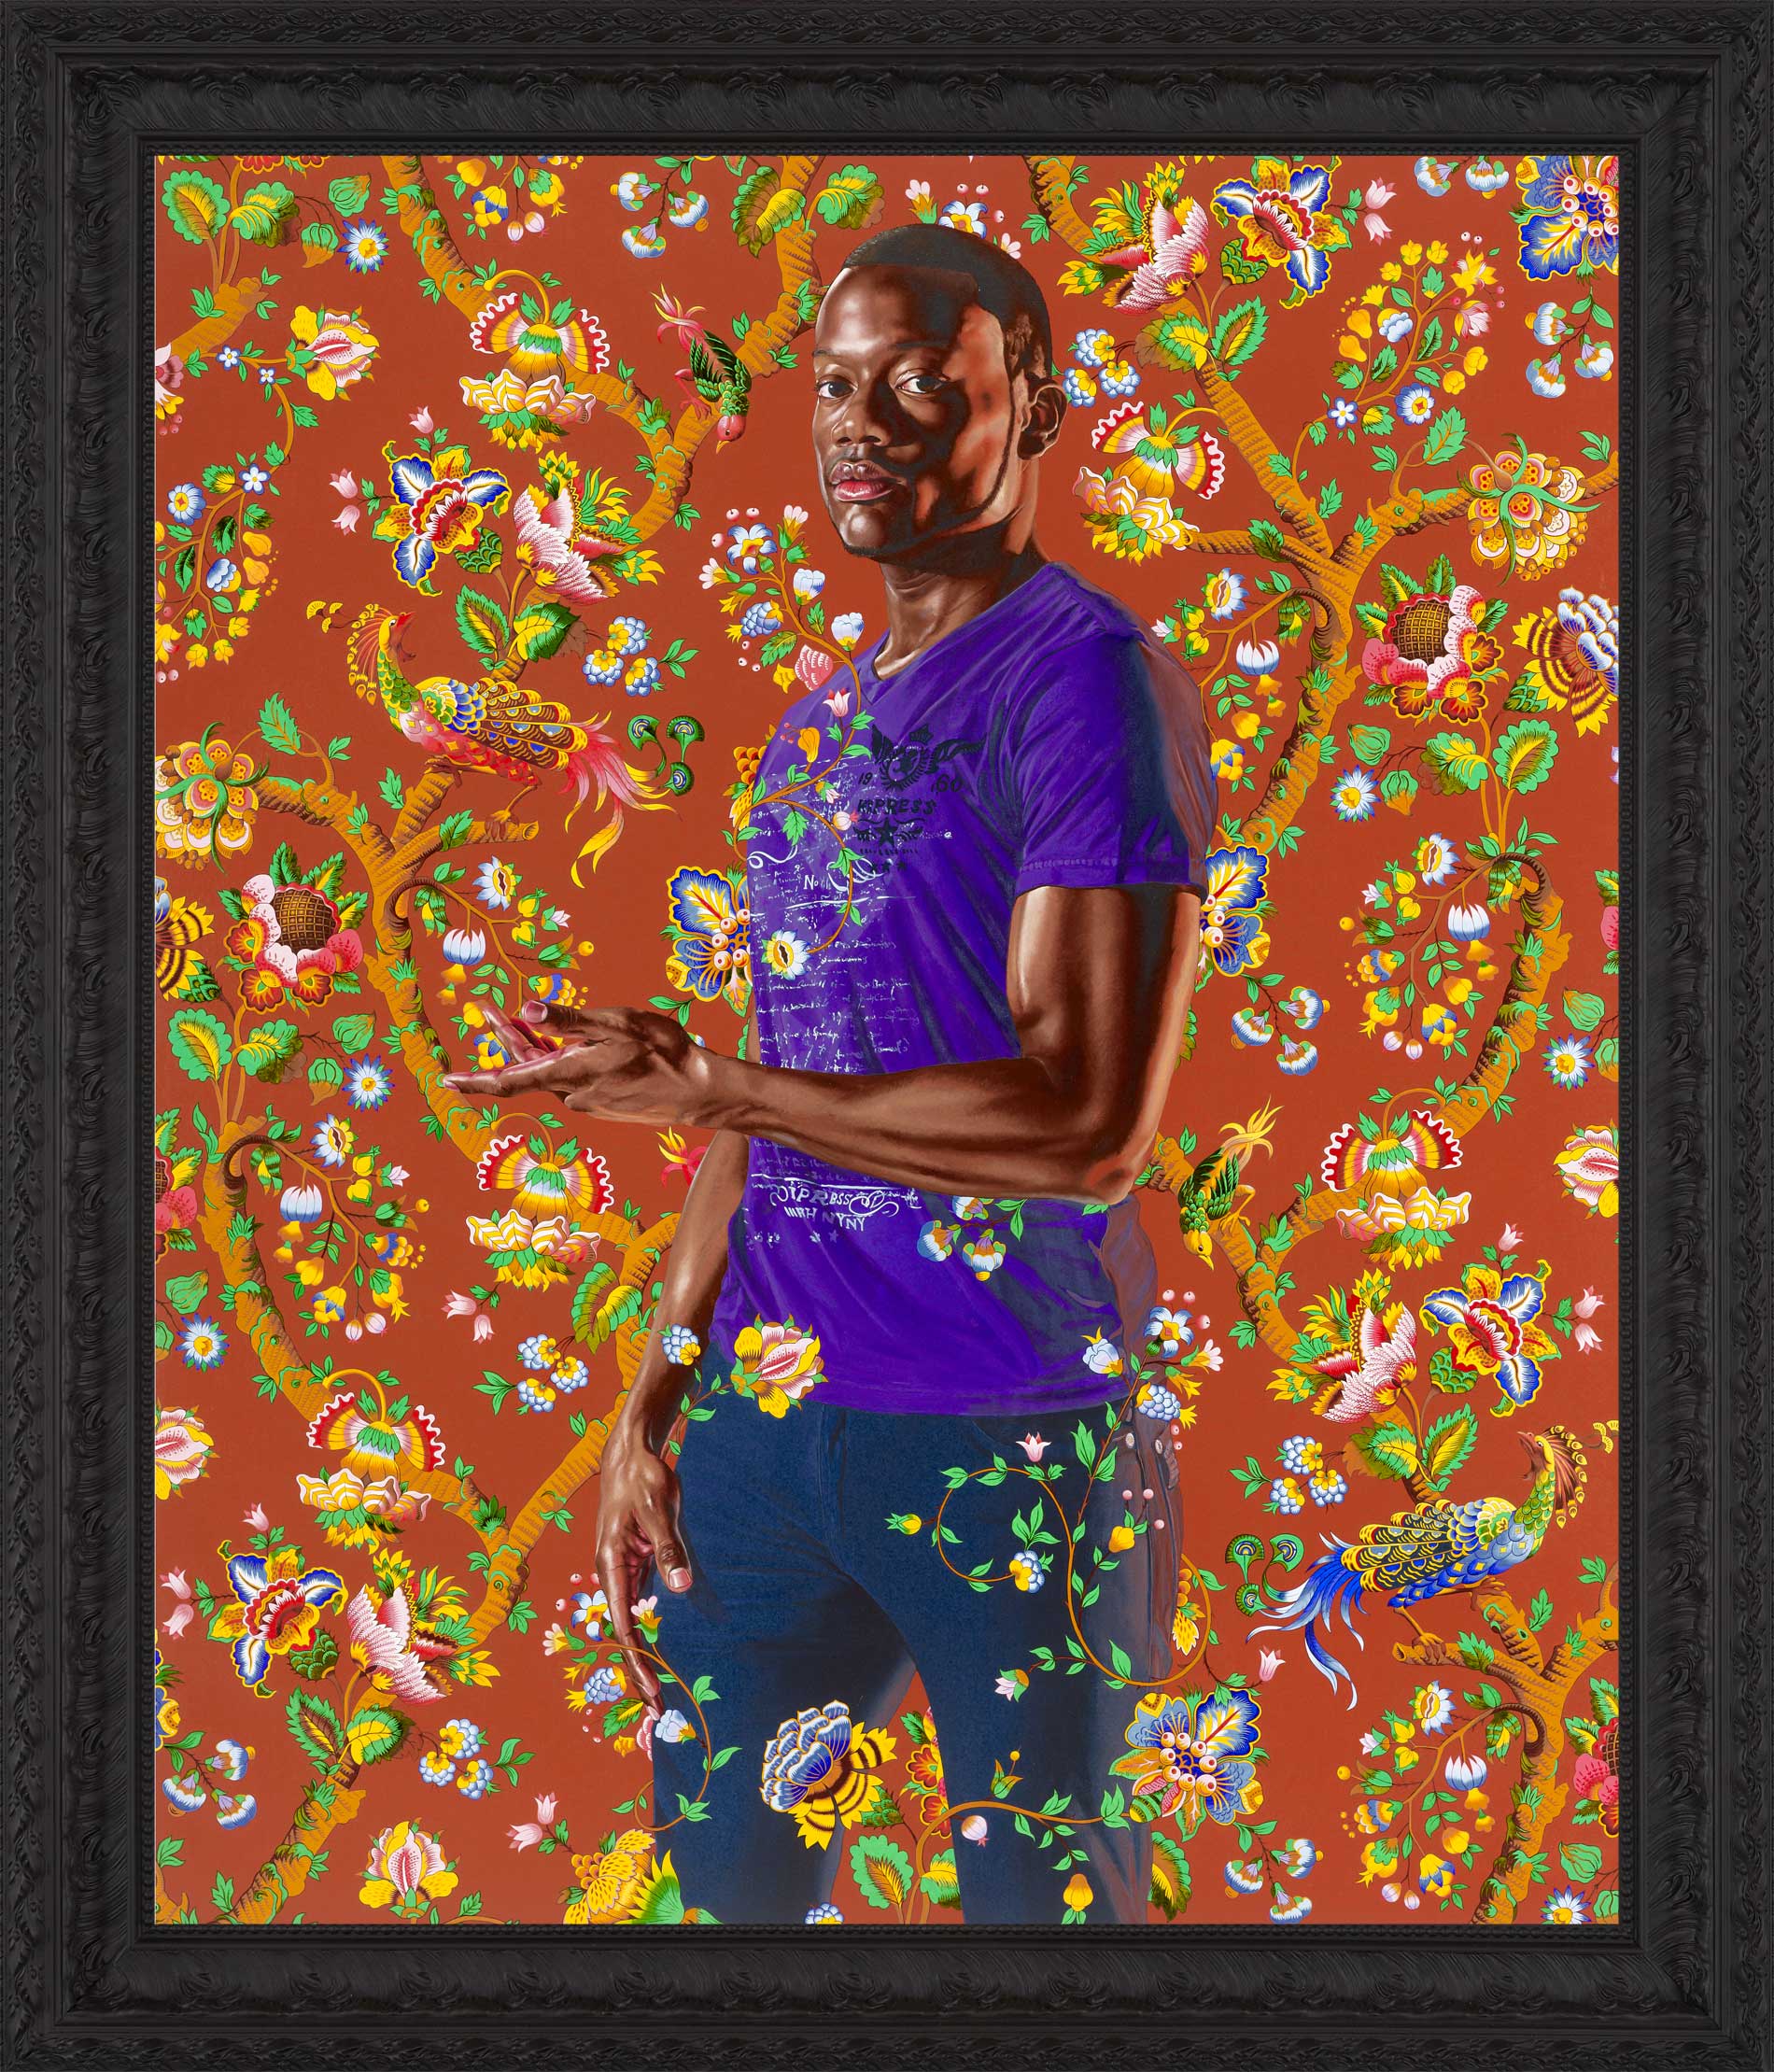 Kehinde Wiley | Selected Works: 2013 | John, 1st Baron Byron, 2013, Oil on Canvas. | 2